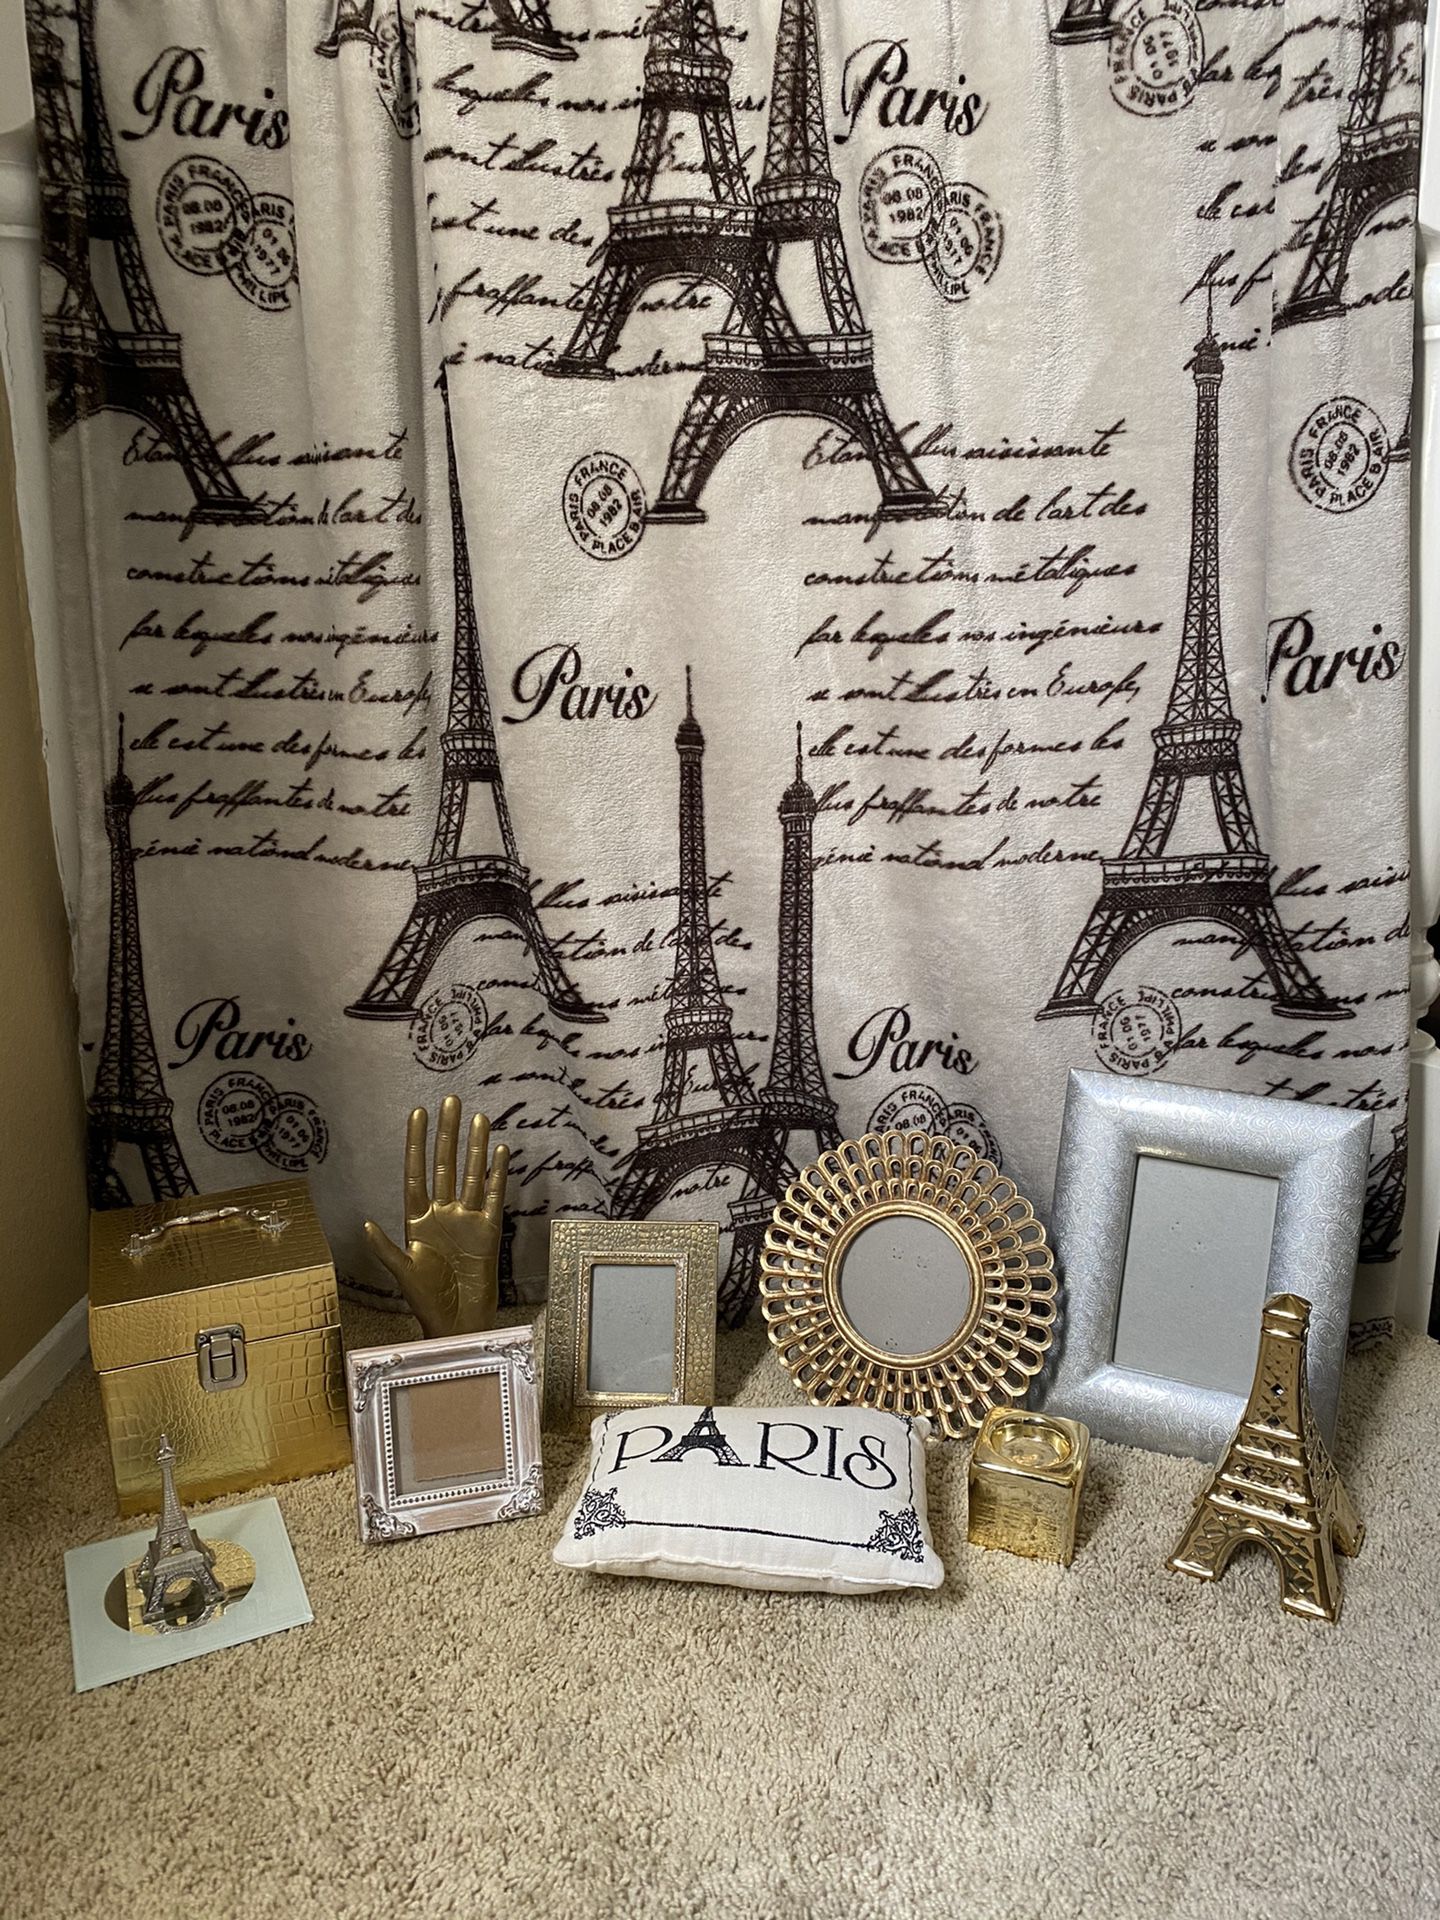 Paris Themed Home Decor - Frames, Blanket, Pillow and more